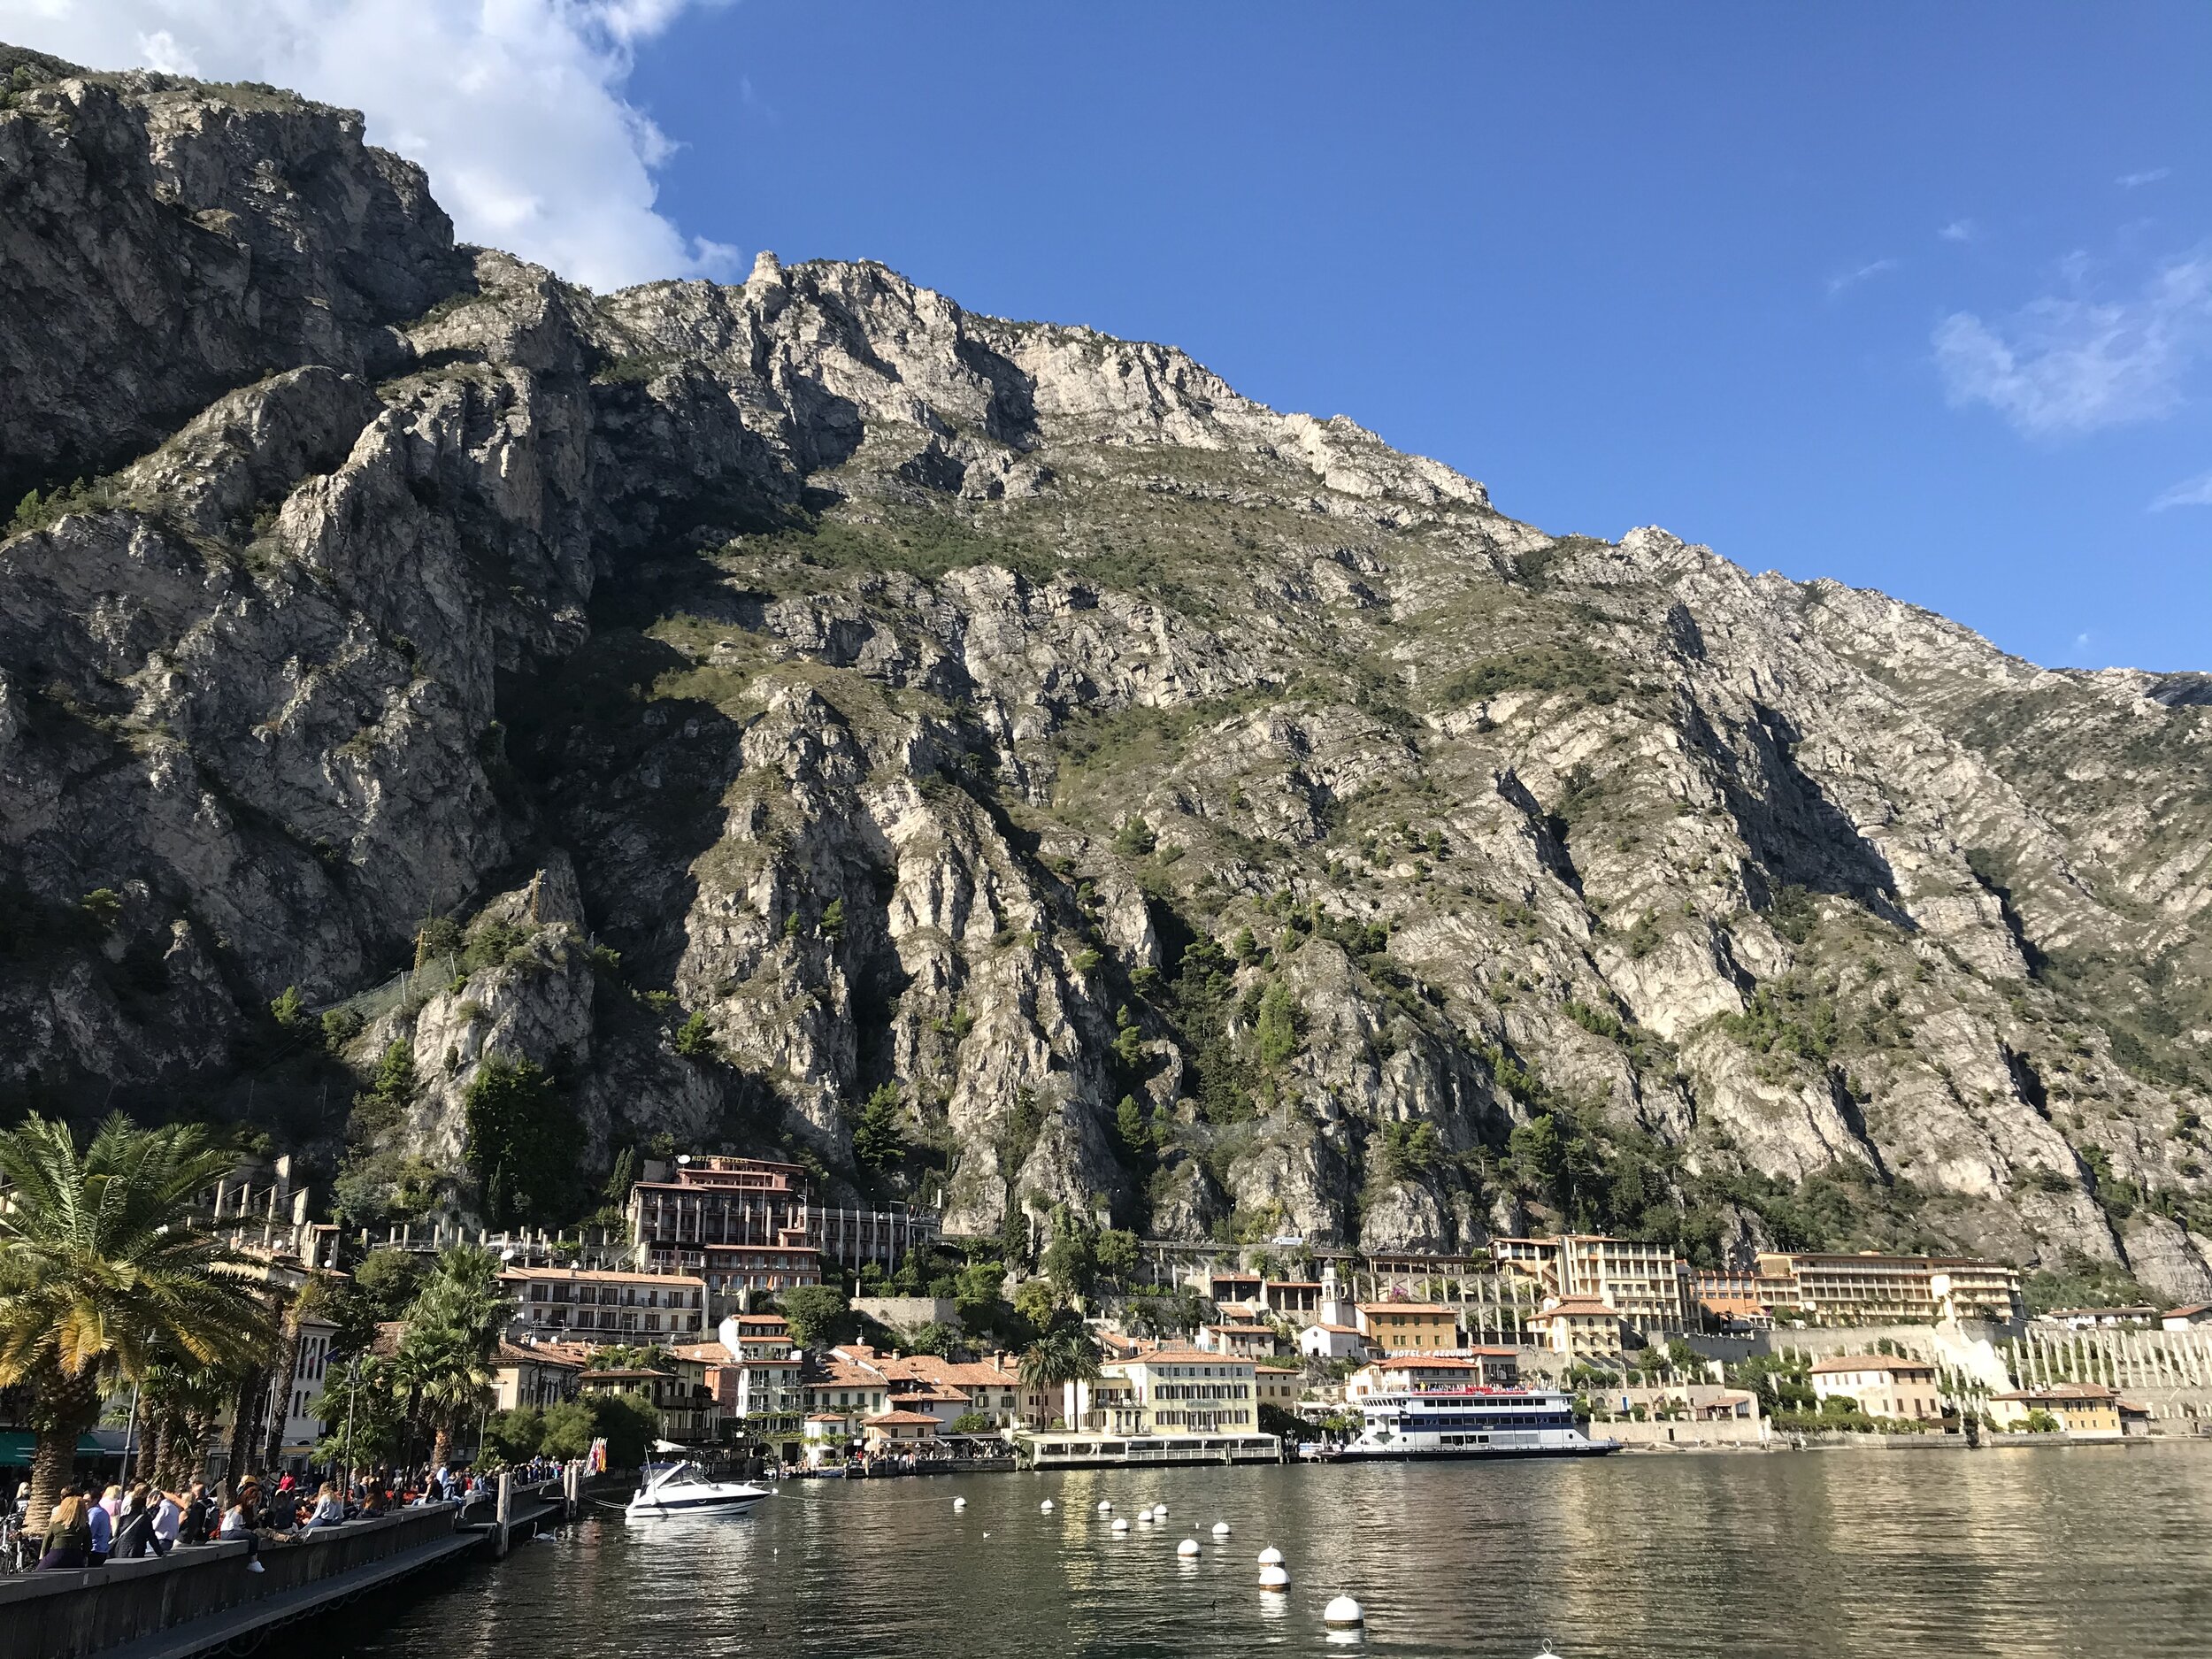   PICTURED:  The town of Limone, nestled under the cliffs of  Lago di Garda.   